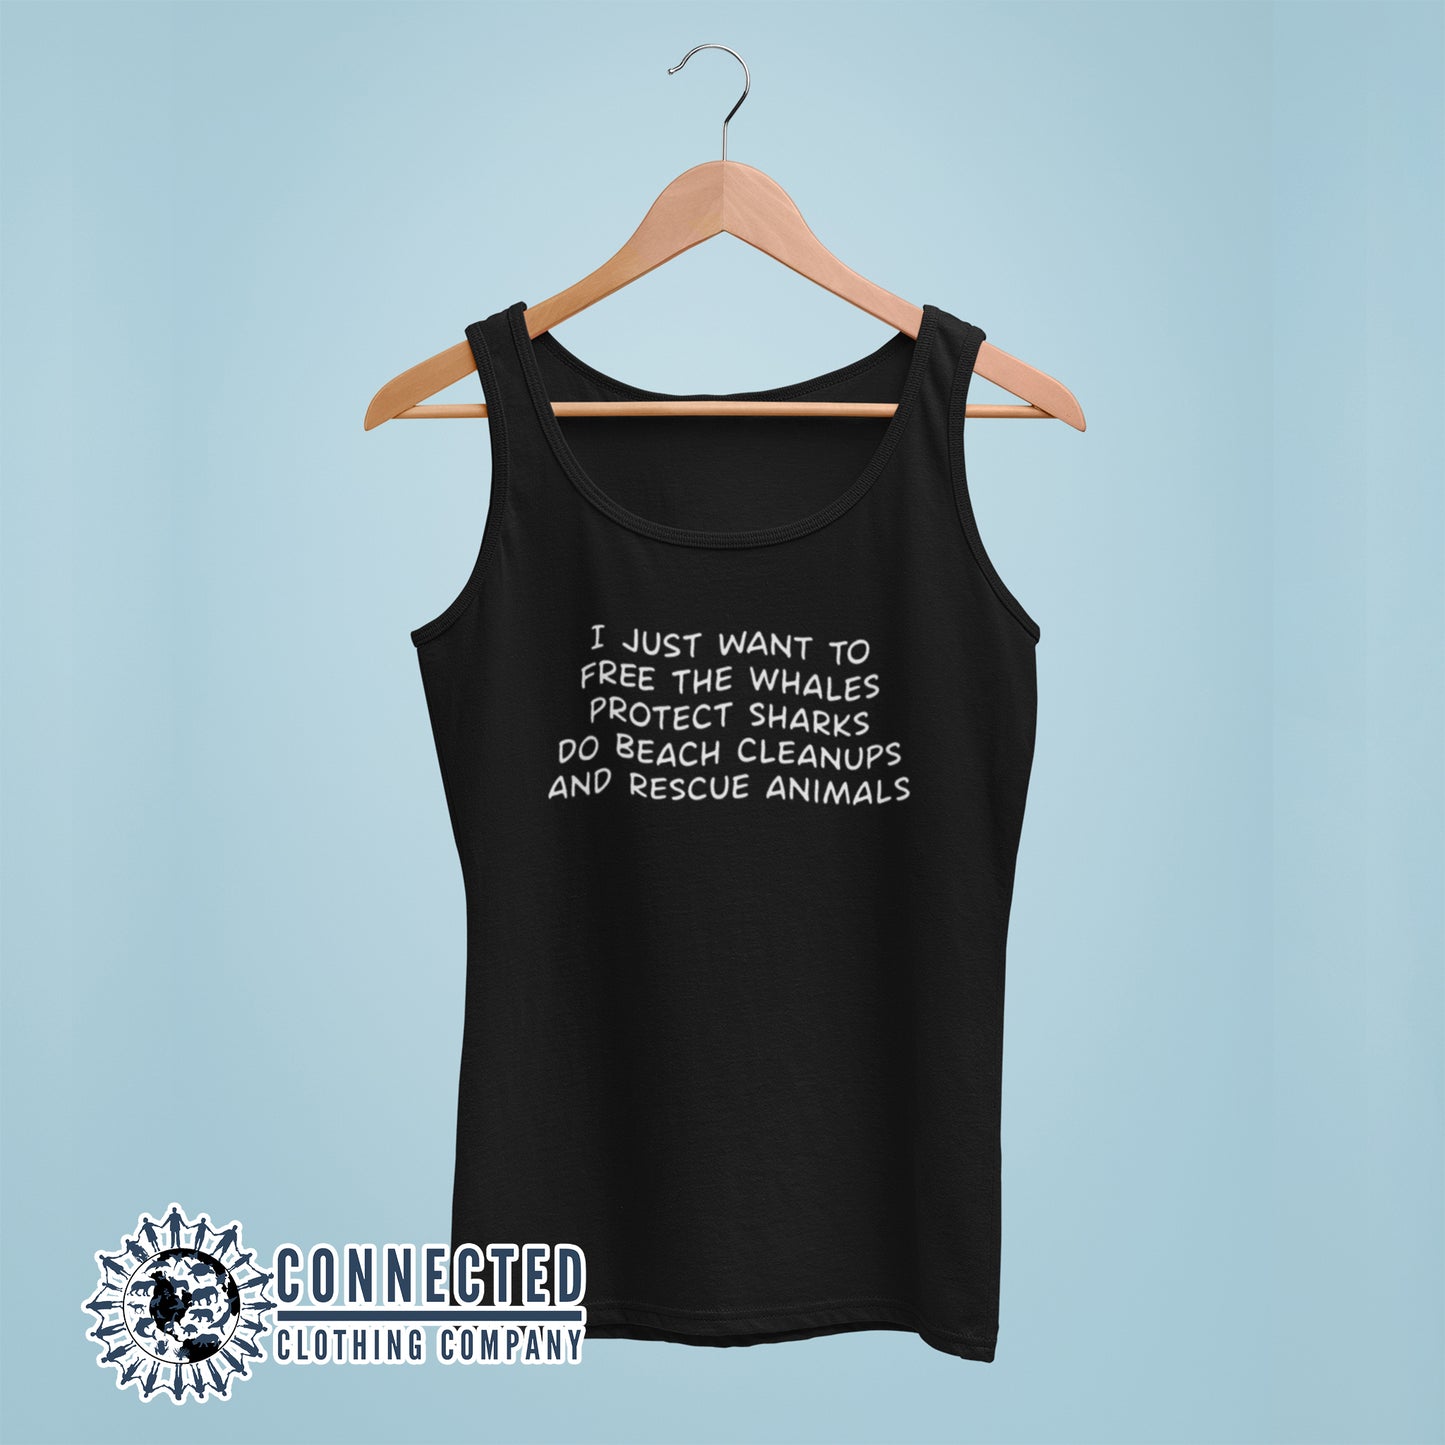 Black I Just Want To Save The World Women's Tank Top reads "I just want to free the whales, protect sharks, do beach cleanups, and rescue animals" - sweetsherriloudesigns - 10% of profits donated to Mission Blue ocean conservation